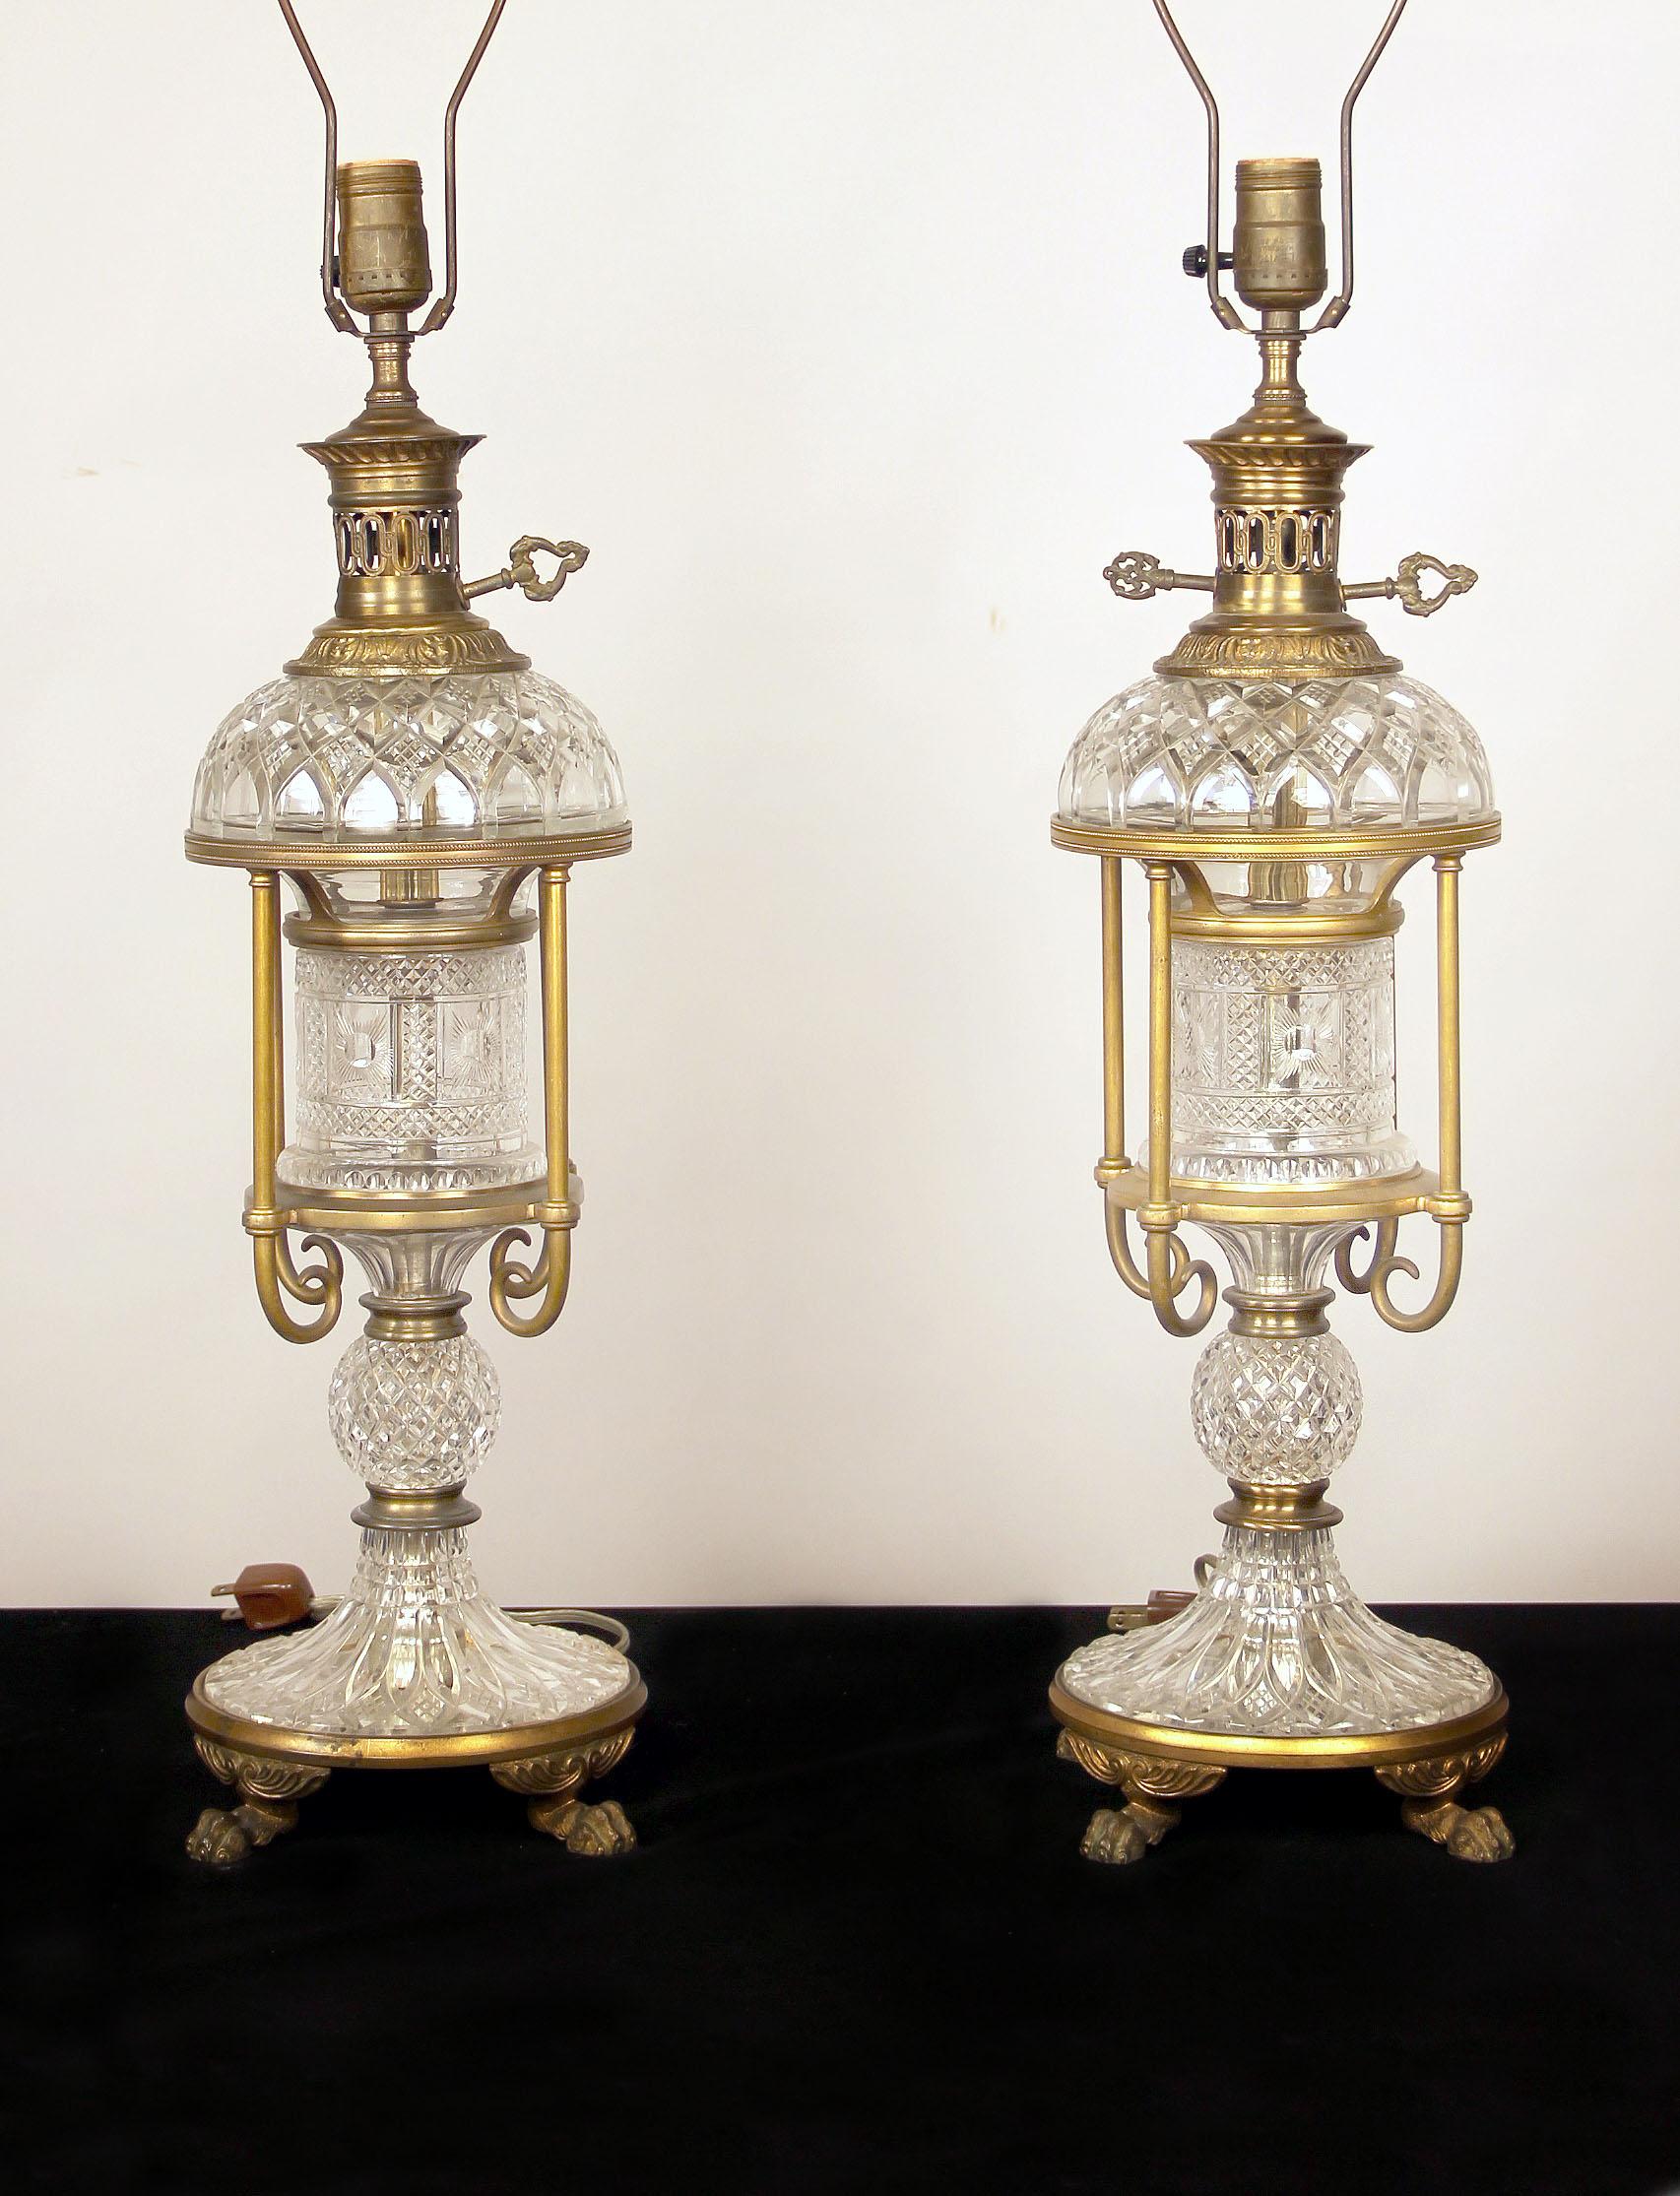 A nice pair of late 19th-early 20th century gilt bronze and French crystal lamps

Fine cut crystal bodies with bronze mounts standing on lion paw feet.
 